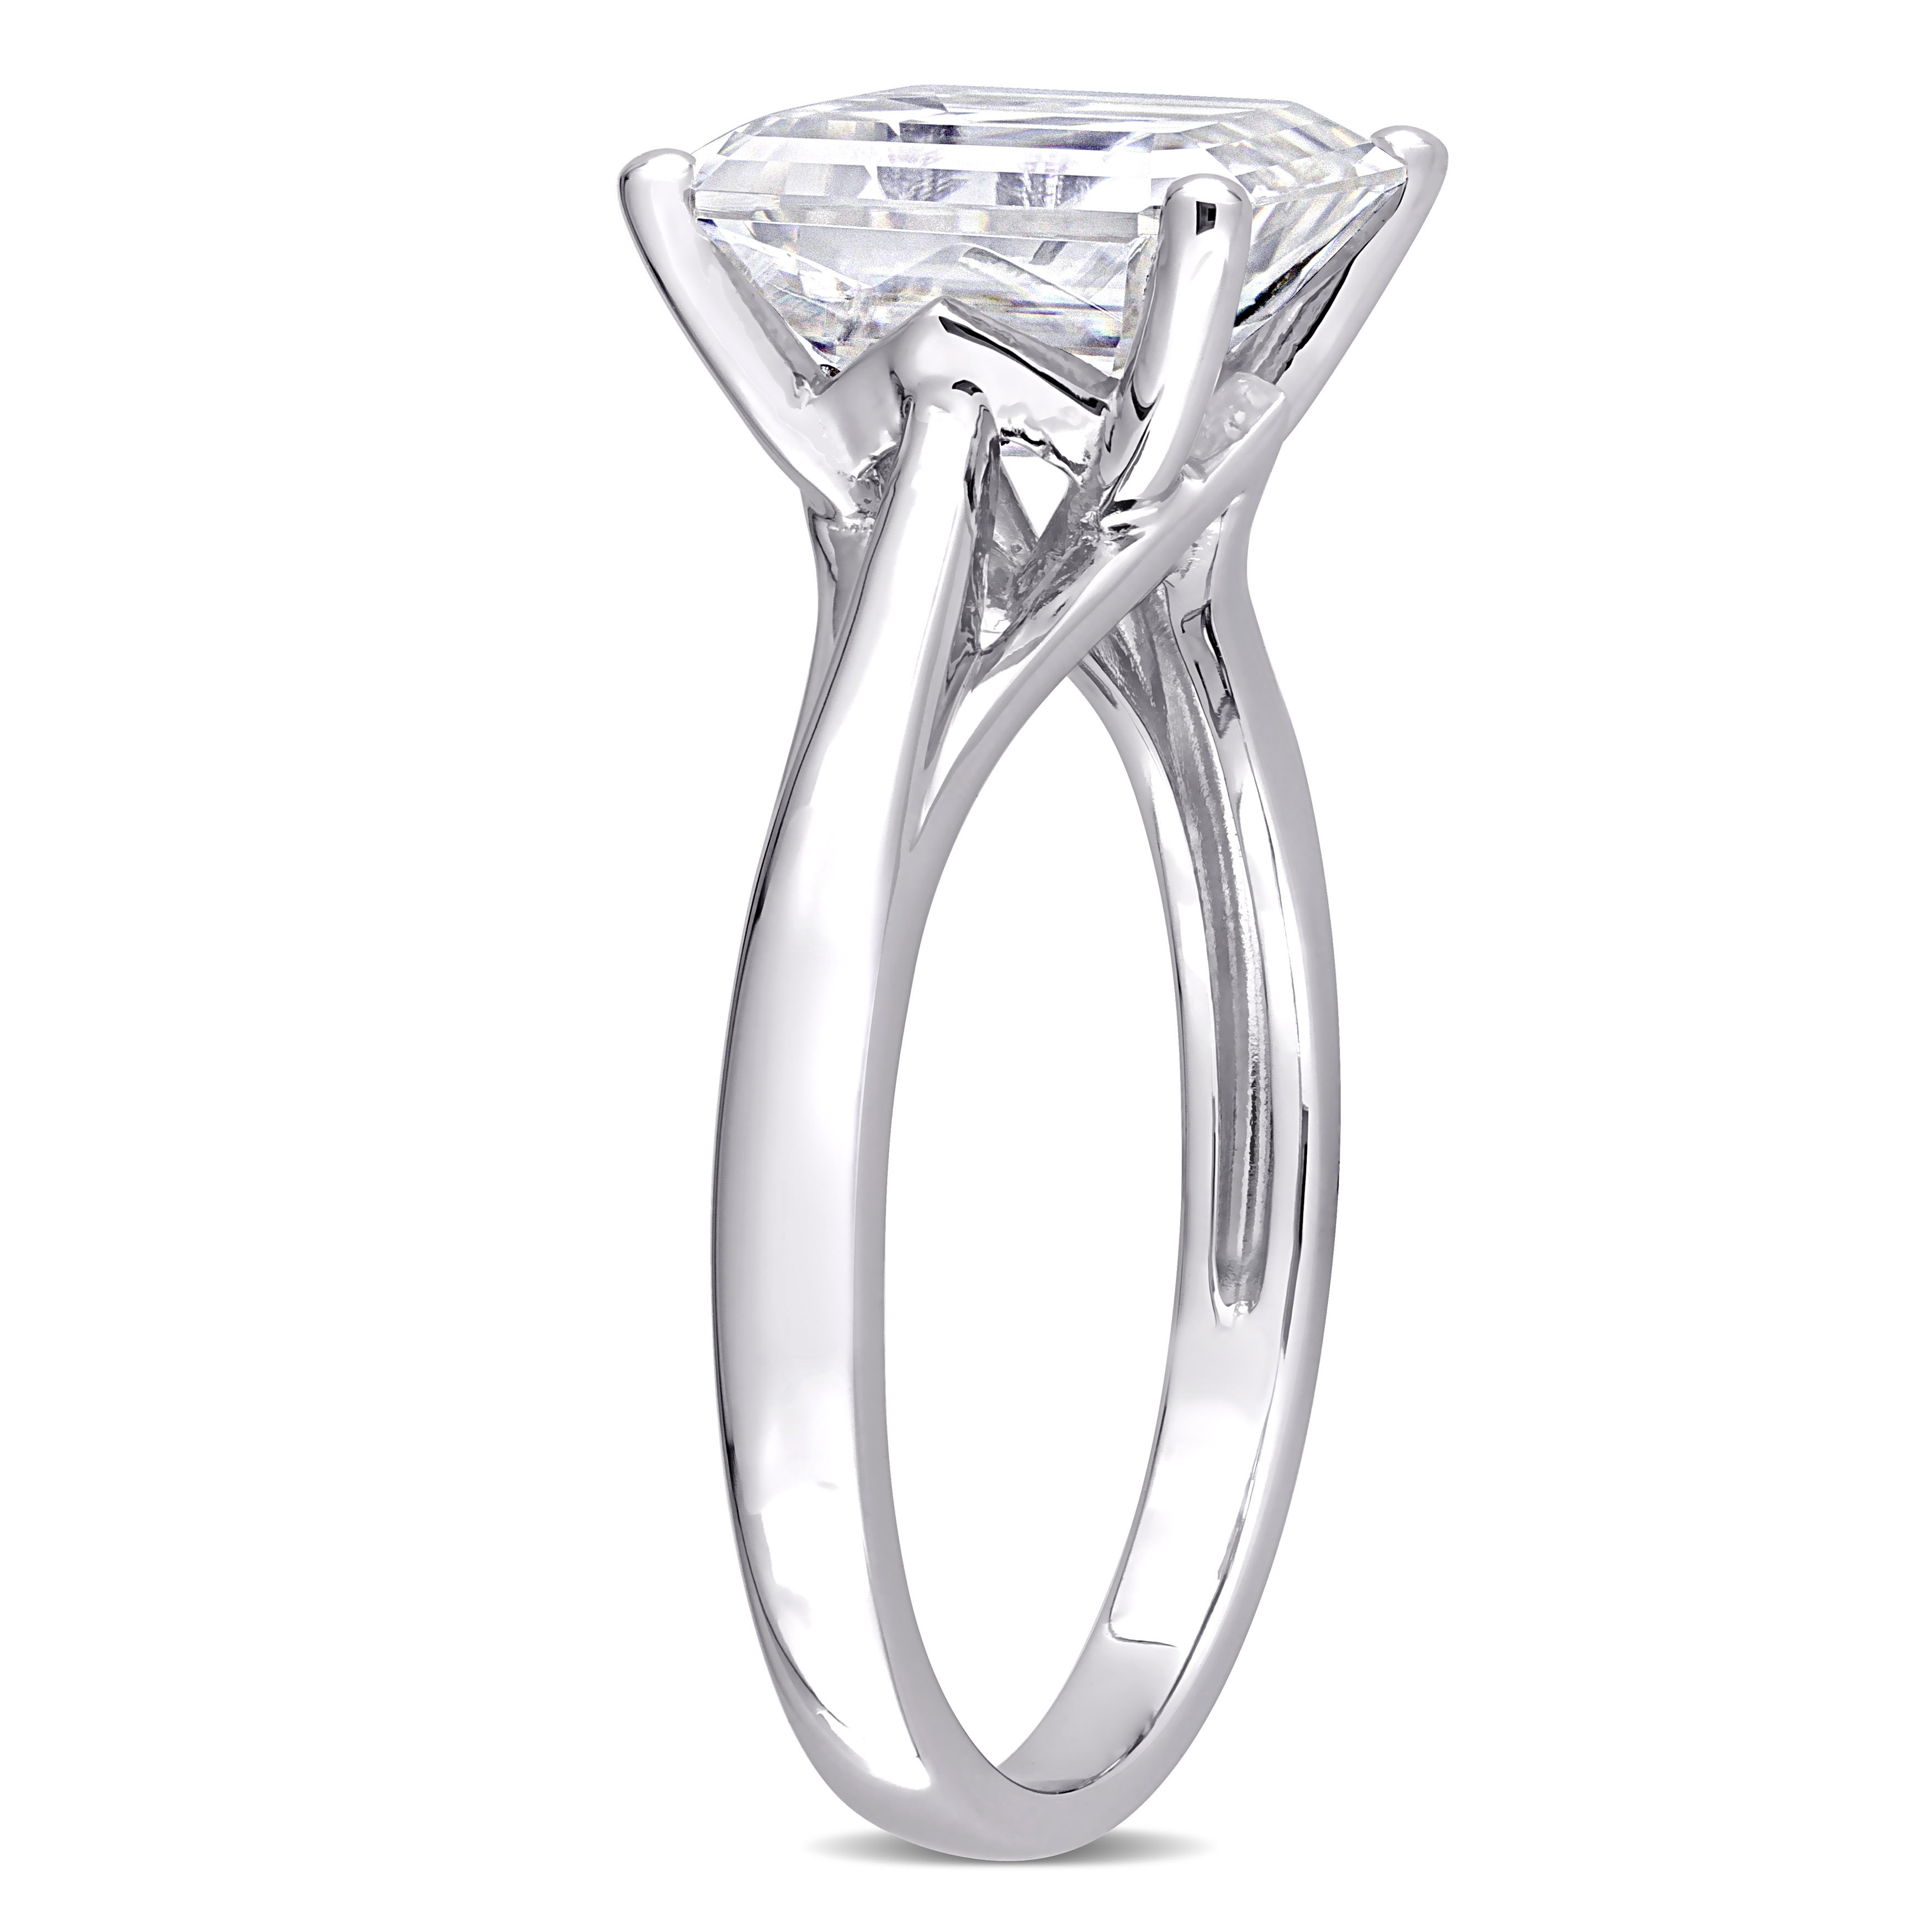 3 1/2 CT DEW Emerald Cut Created Moissanite Solitaire Ring in 10k White Gold